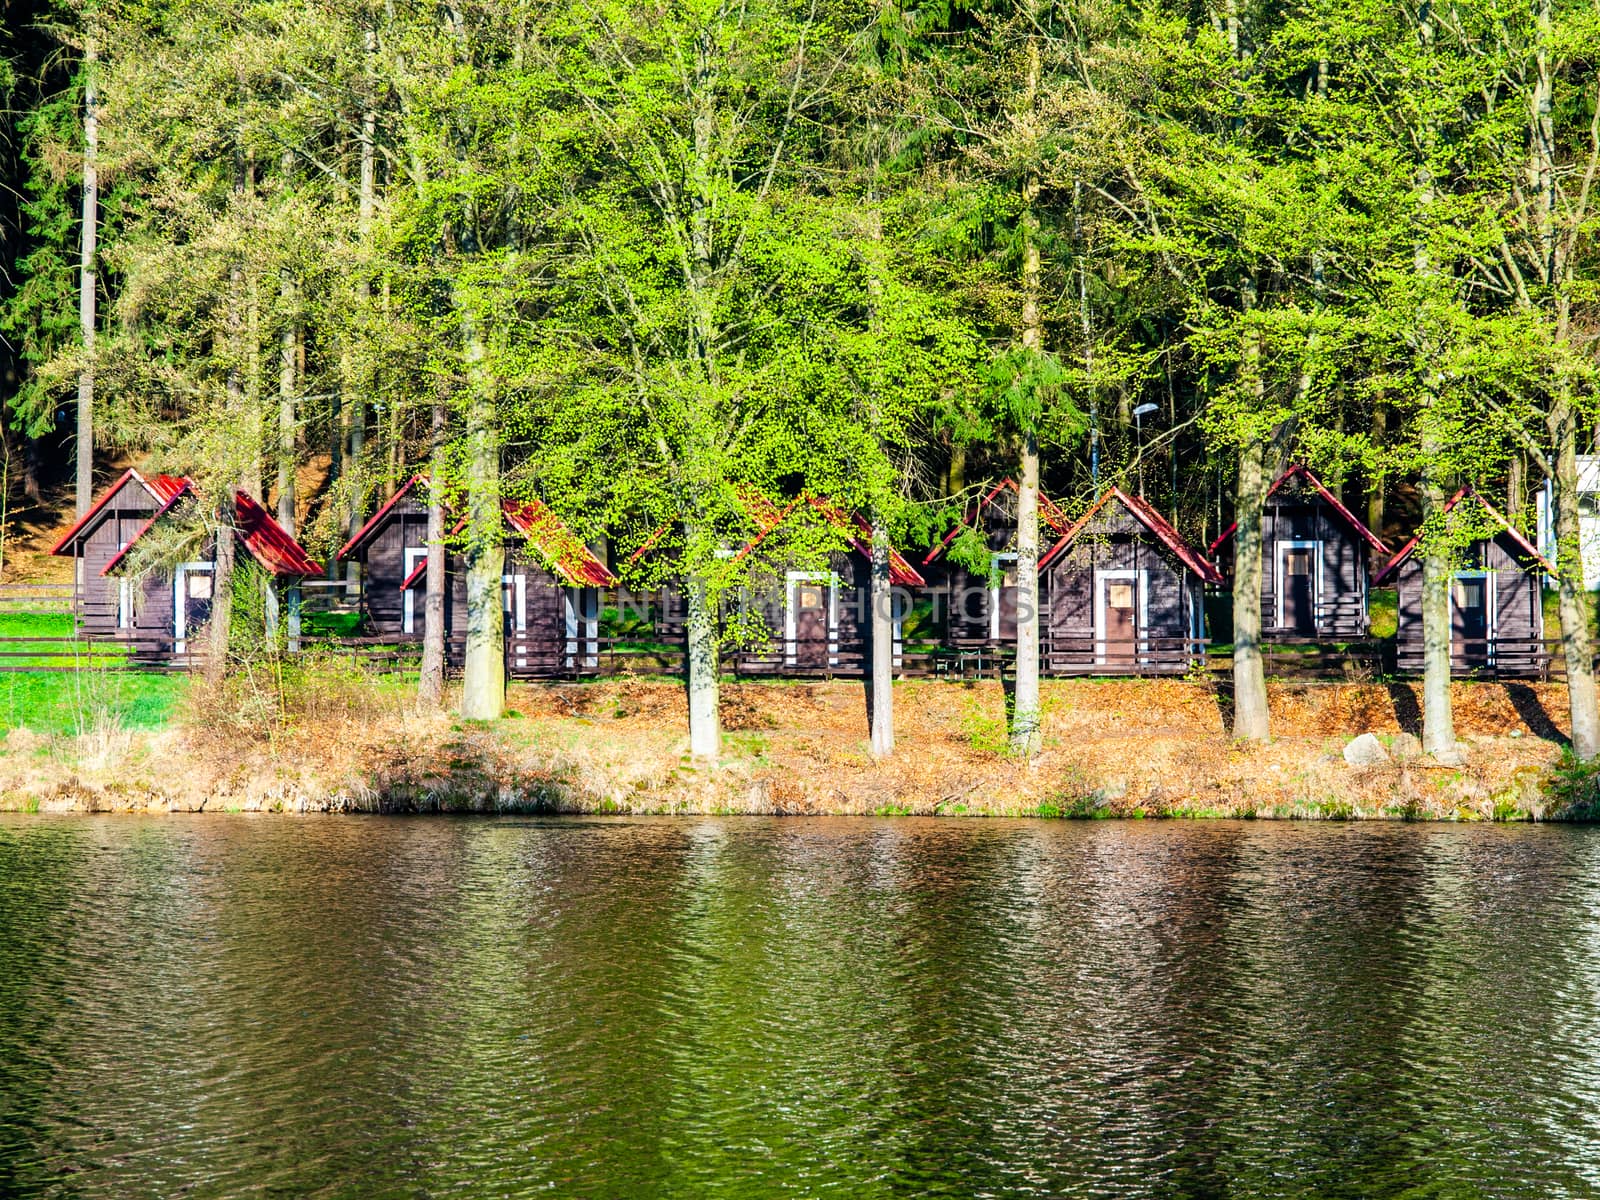 Small wooden forest cottages at the water.